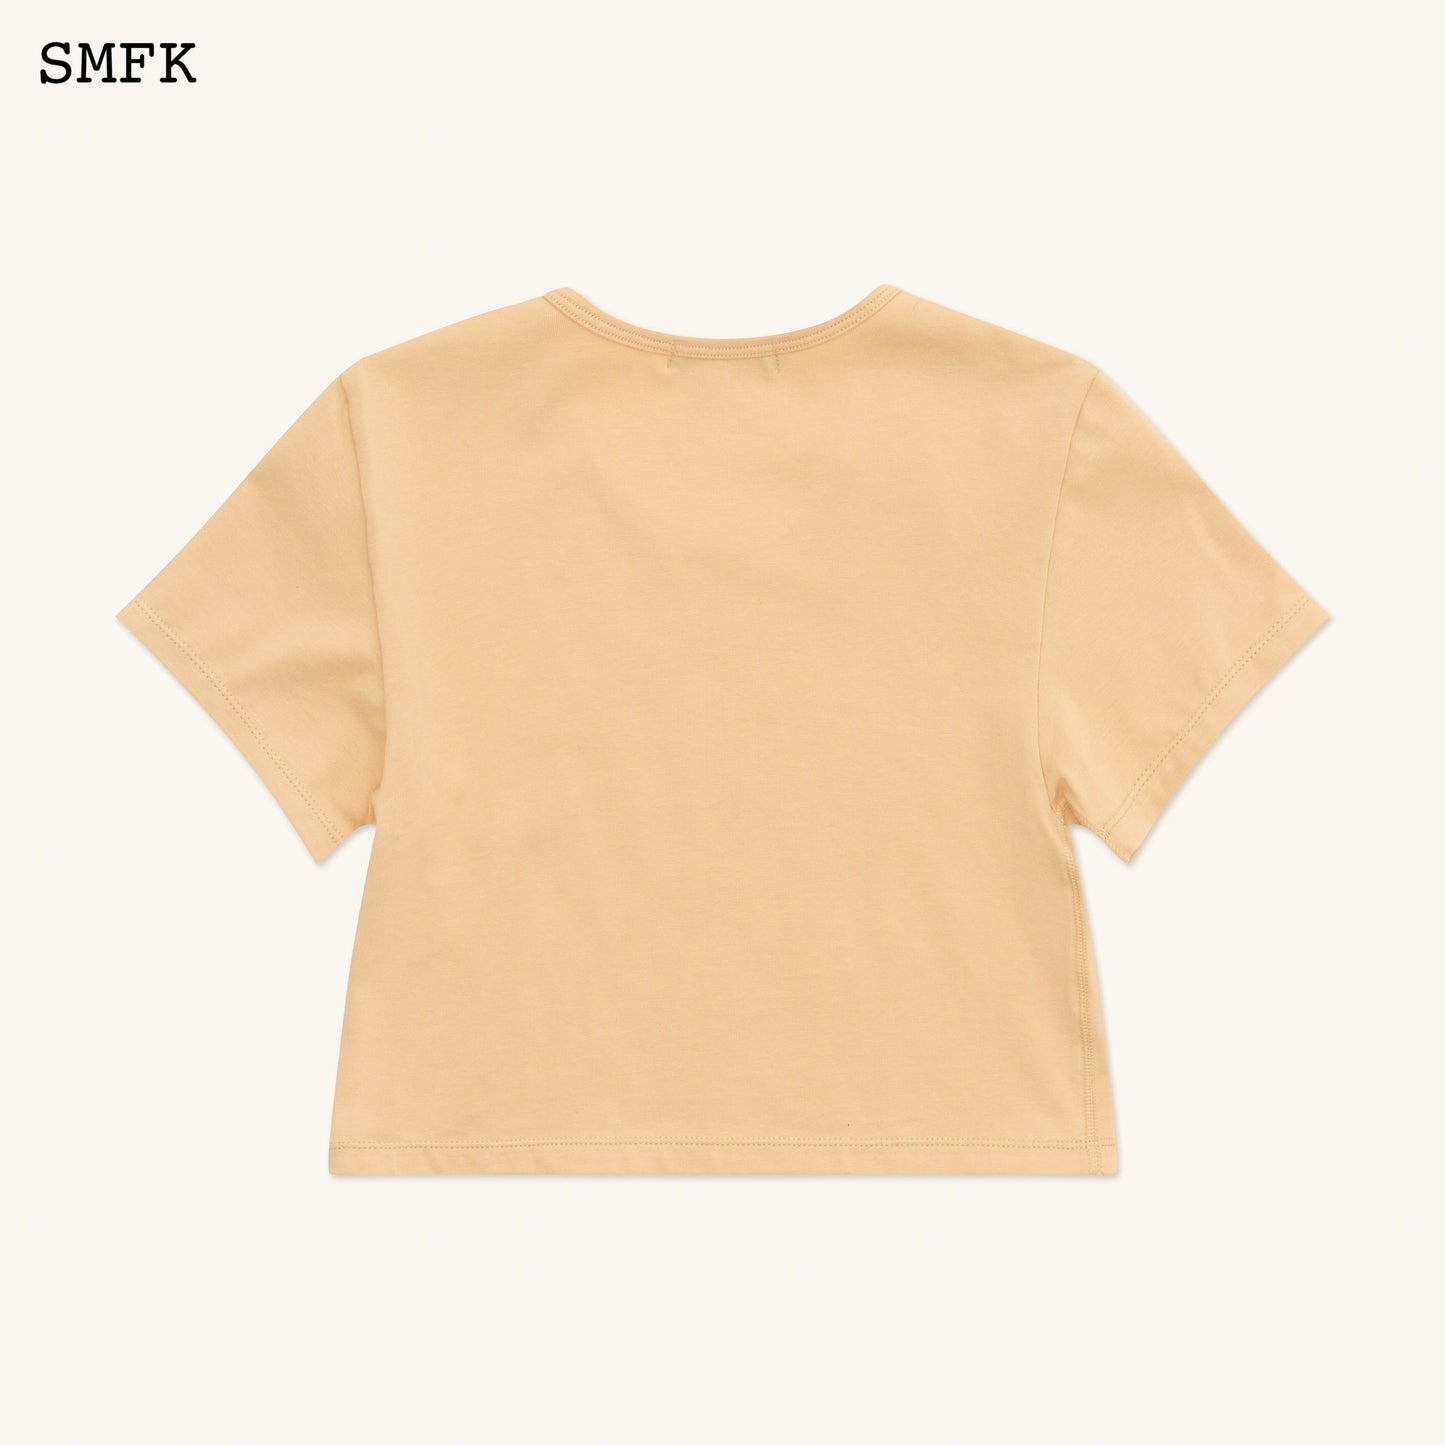 SMFK Compass Cross Classic Sporty Tights Tee In Sand